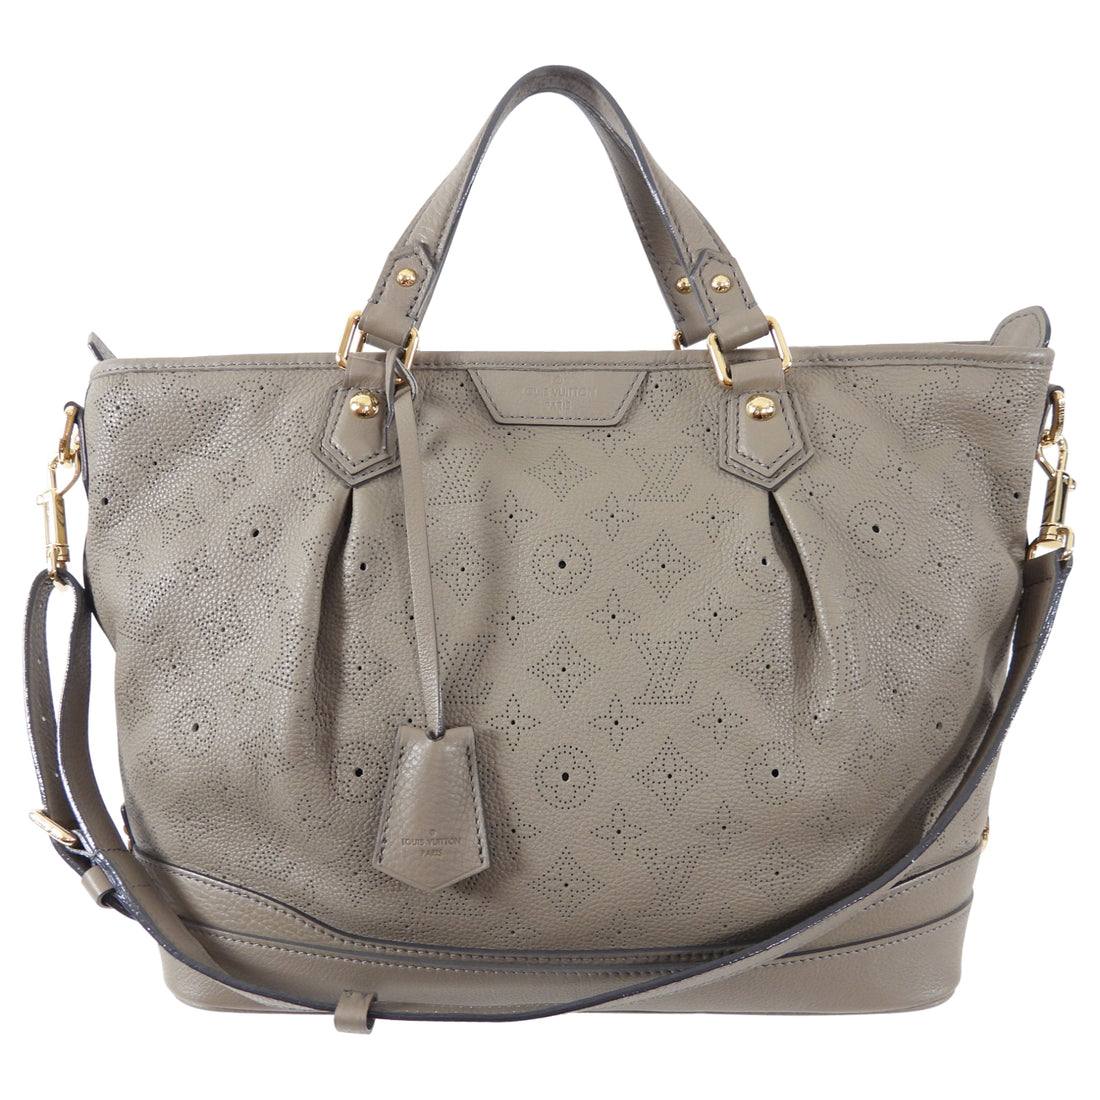 BRAND NEW Authentic Louis Vuitton L Taupe Mahina "PERFORATED"  Monogram Flower